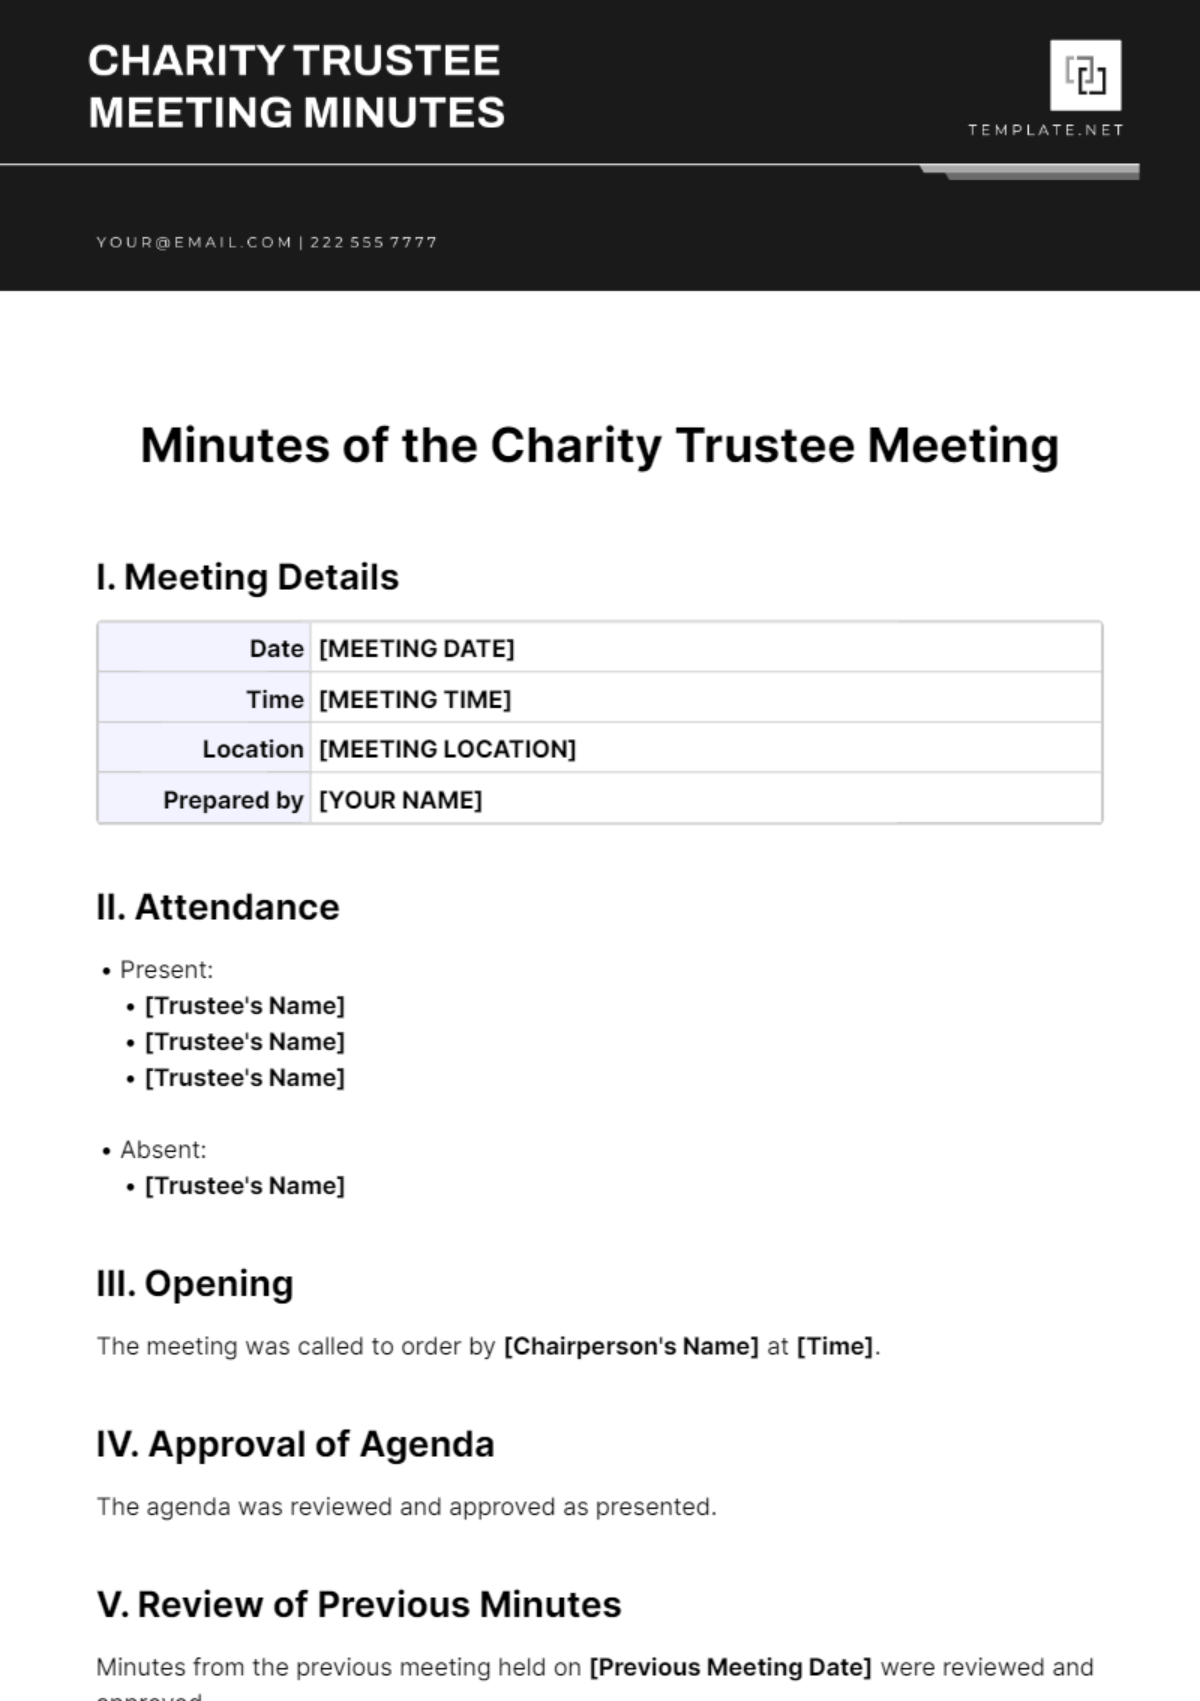 Charity Trustee Meeting Minutes Template